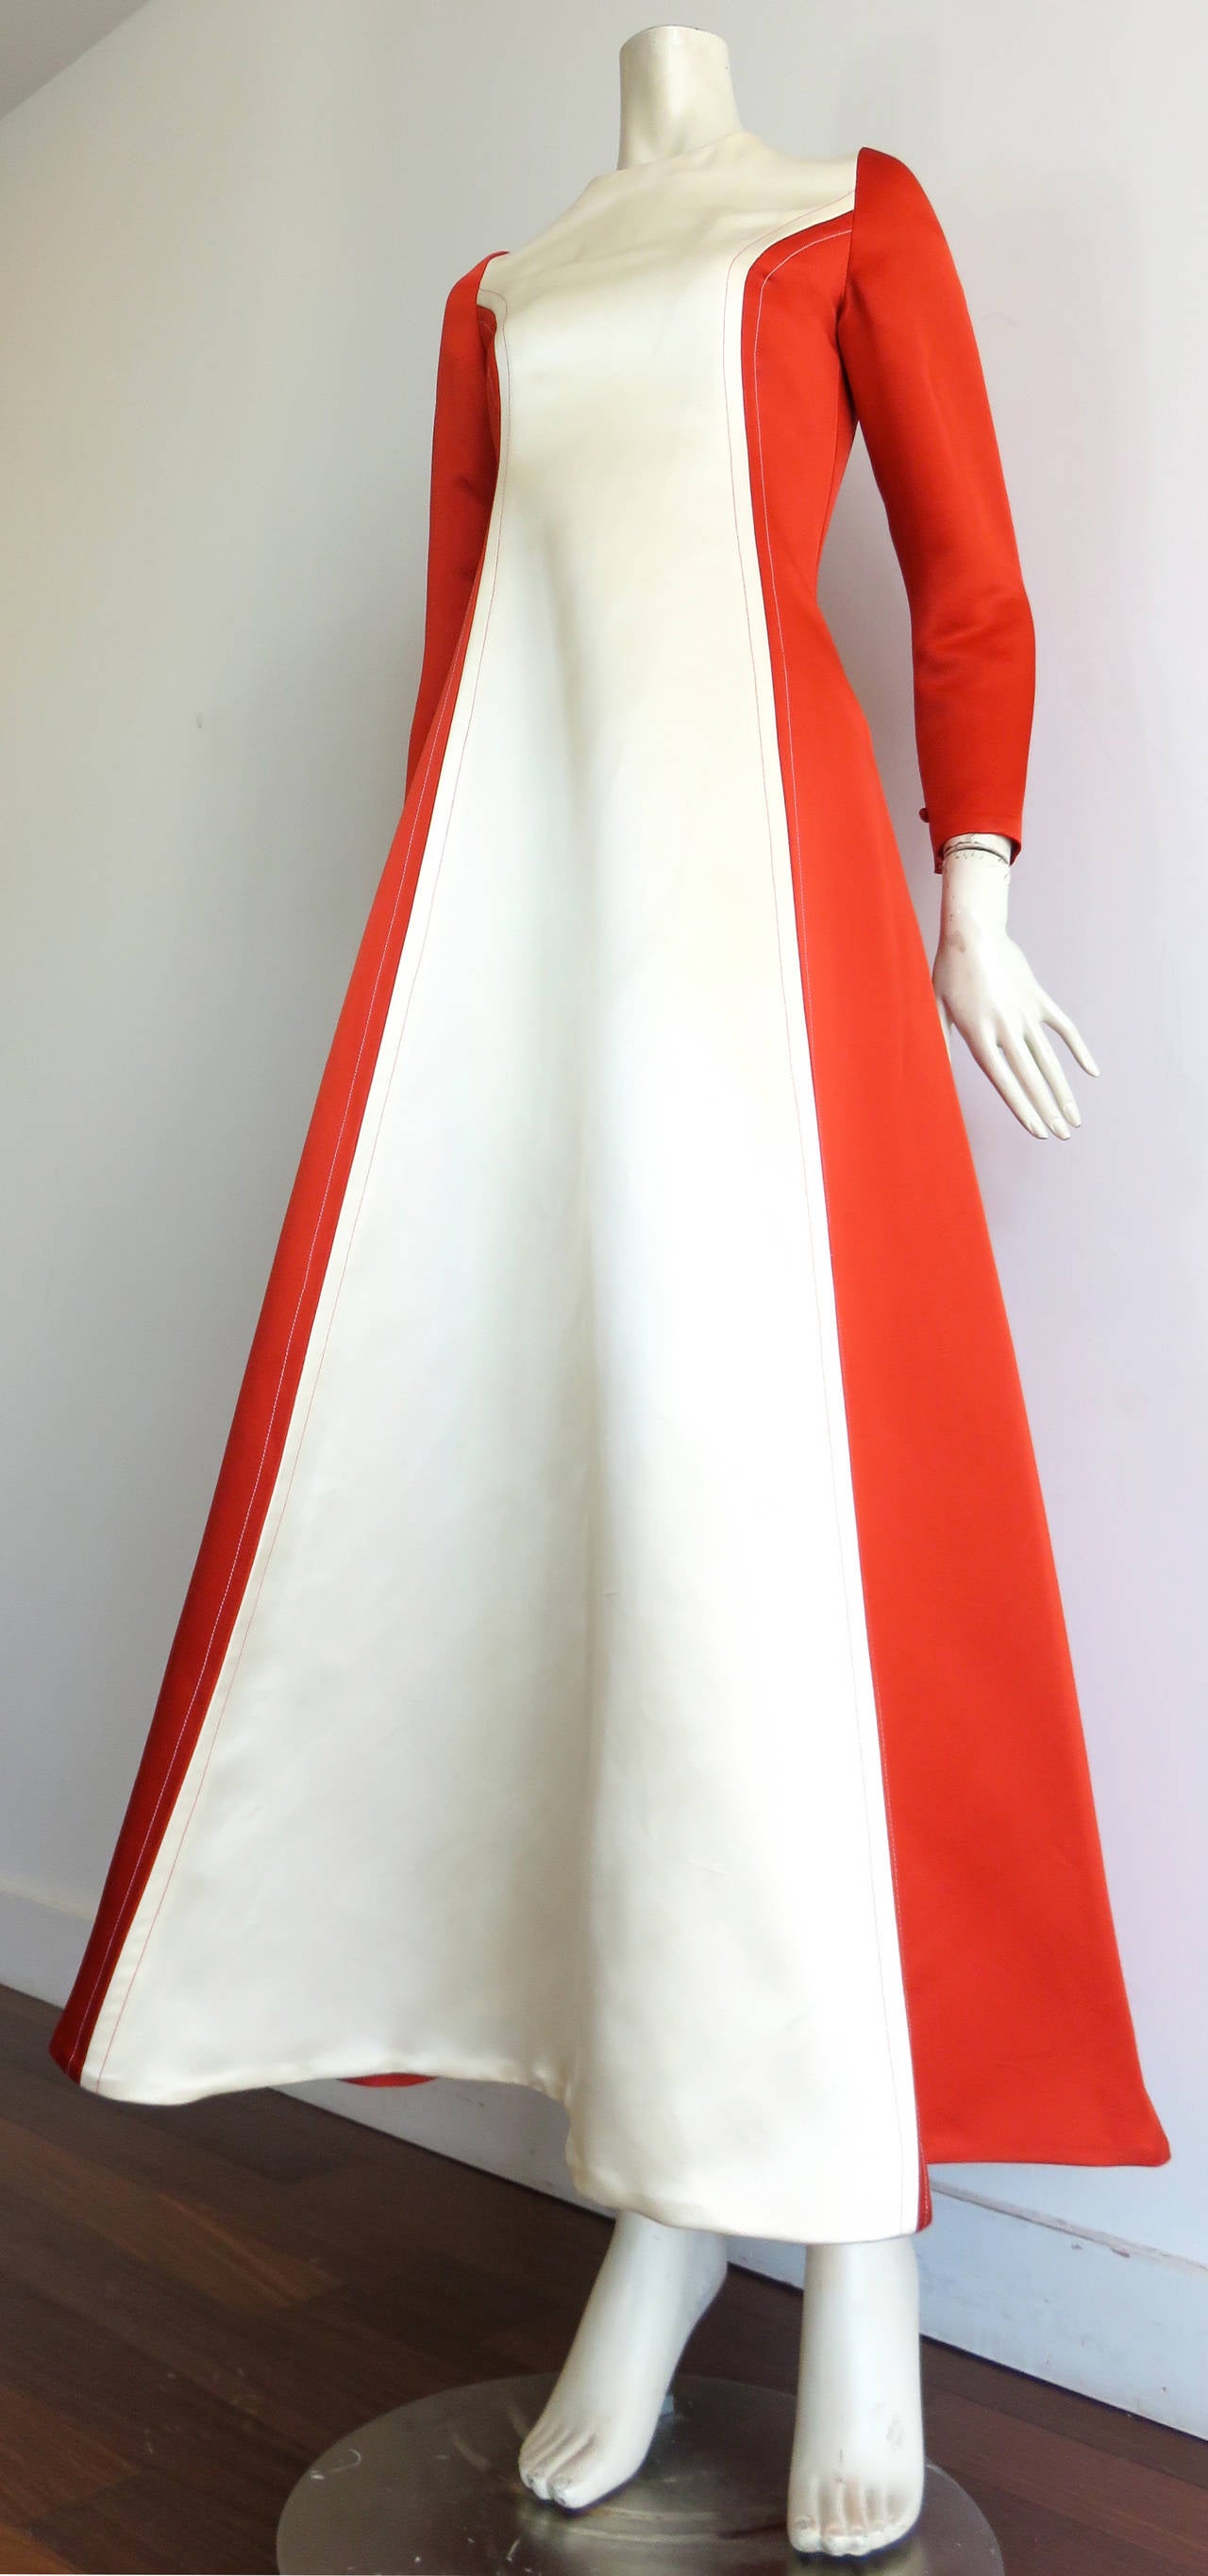 Absolutely stunning, BILL BLASS 1970's Duchess silk satin gown. 

This incredible gown was designed by Bill Blass during the early 1970's in New York, and is in excellent condition.

The base fabric is a thick, duchess satin that is incredible